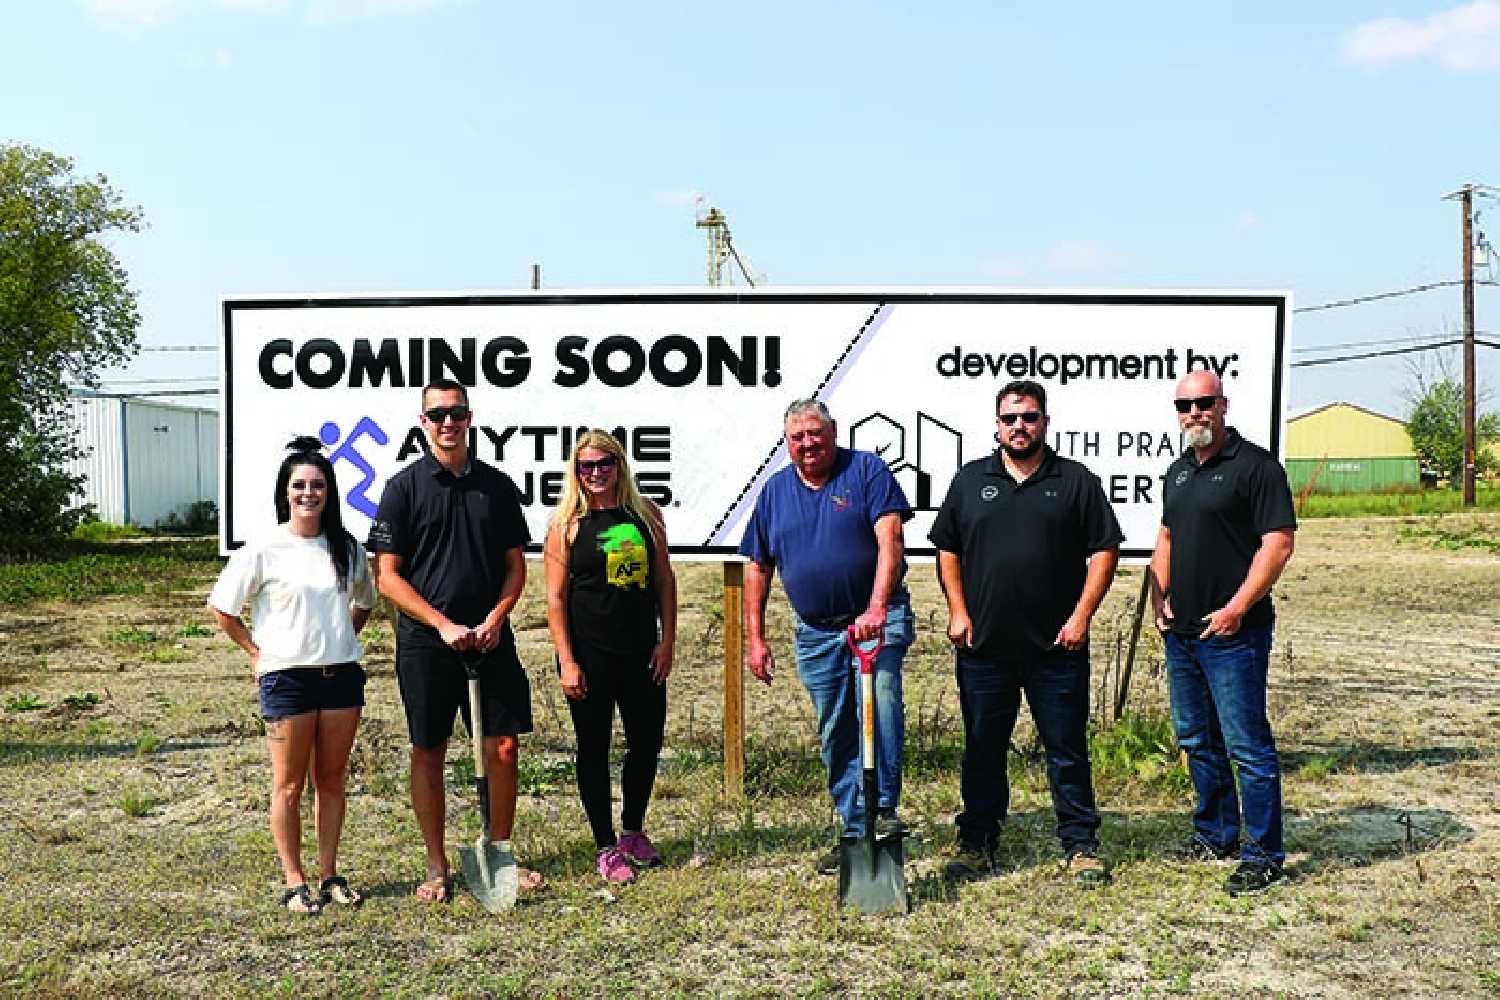 A groundbreaking was held August 28 for the Anytime Fitness location in Moosomin. From left are, Carmen and Jay Hamilton of South Prairie Design, Anytime Fitness Owner Jolene de Vries, Mayor Larry Tomlinson, along with Senior Project Manager Doug Morrow and General  Manager Scott Bromley of Keller Developments.